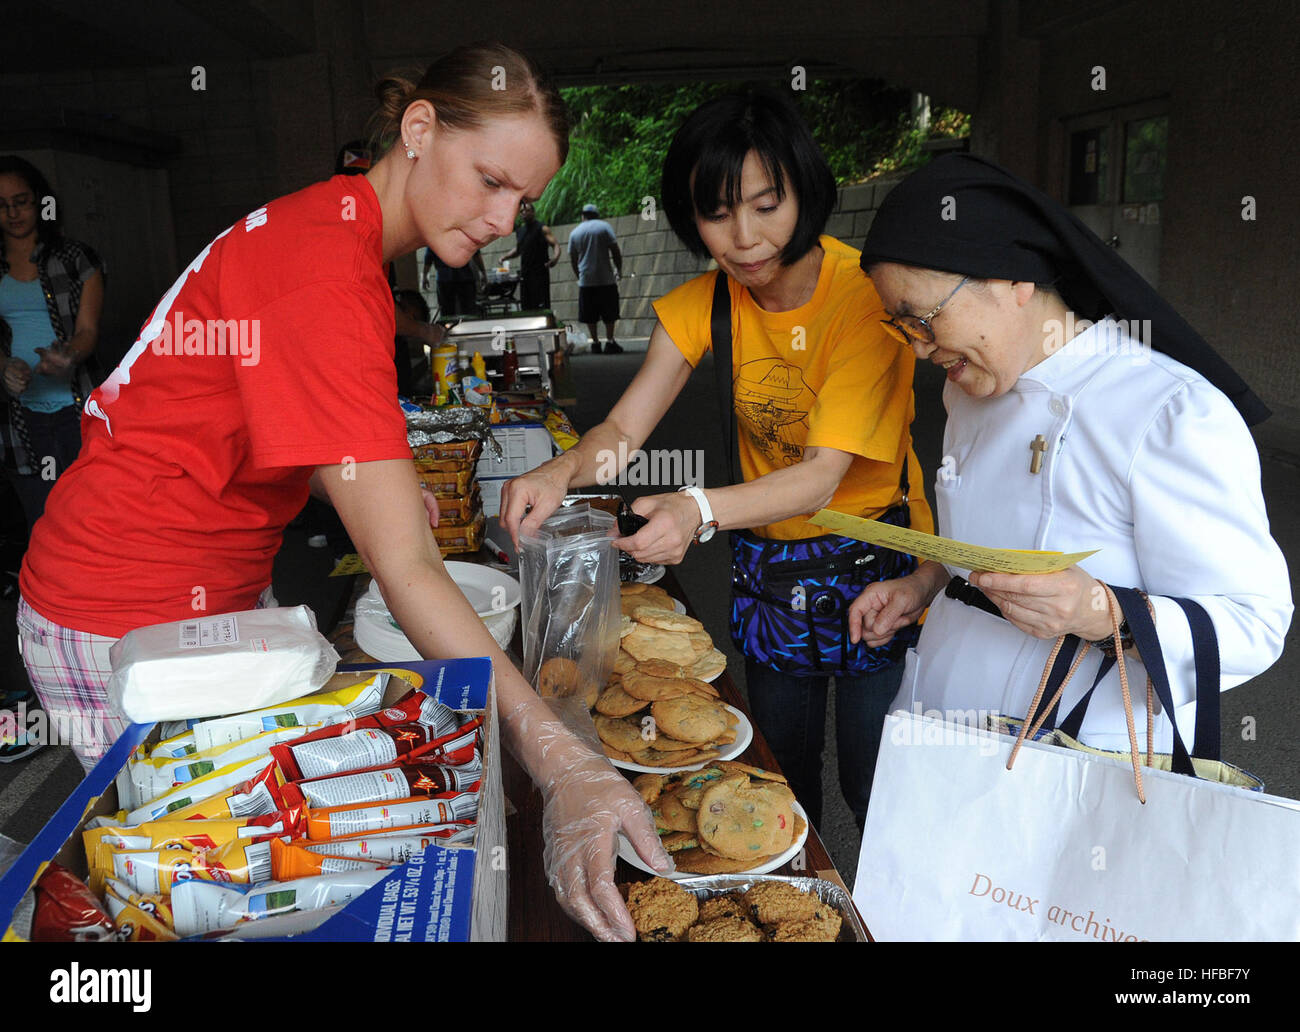 110605-N-VE260-056 FUJISAWA, Japan (June 10, 2011) Aviation Machinist's Mate Airman Heather Wolff, left, and Sumie Maruyama help a nun pick out cookies during the Misono Kodomo-ne-ie Orphanage Festival. Maruyama is from the Host Nation Relations Office at Naval Air Facility Atsugi. This is the second year that Sailors from Naval Air Facility Atsugi volunteered at the event. (U.S. Navy photo by Mass Communication Specialist 2nd Class Justin Smelley/Released)  - Official U.S. Navy Imagery - Aviation Machinist's Mate Airman Heather Wolff helps a nun during the Misono Kodomo-ne-ie Orphanage Festiv Stock Photo